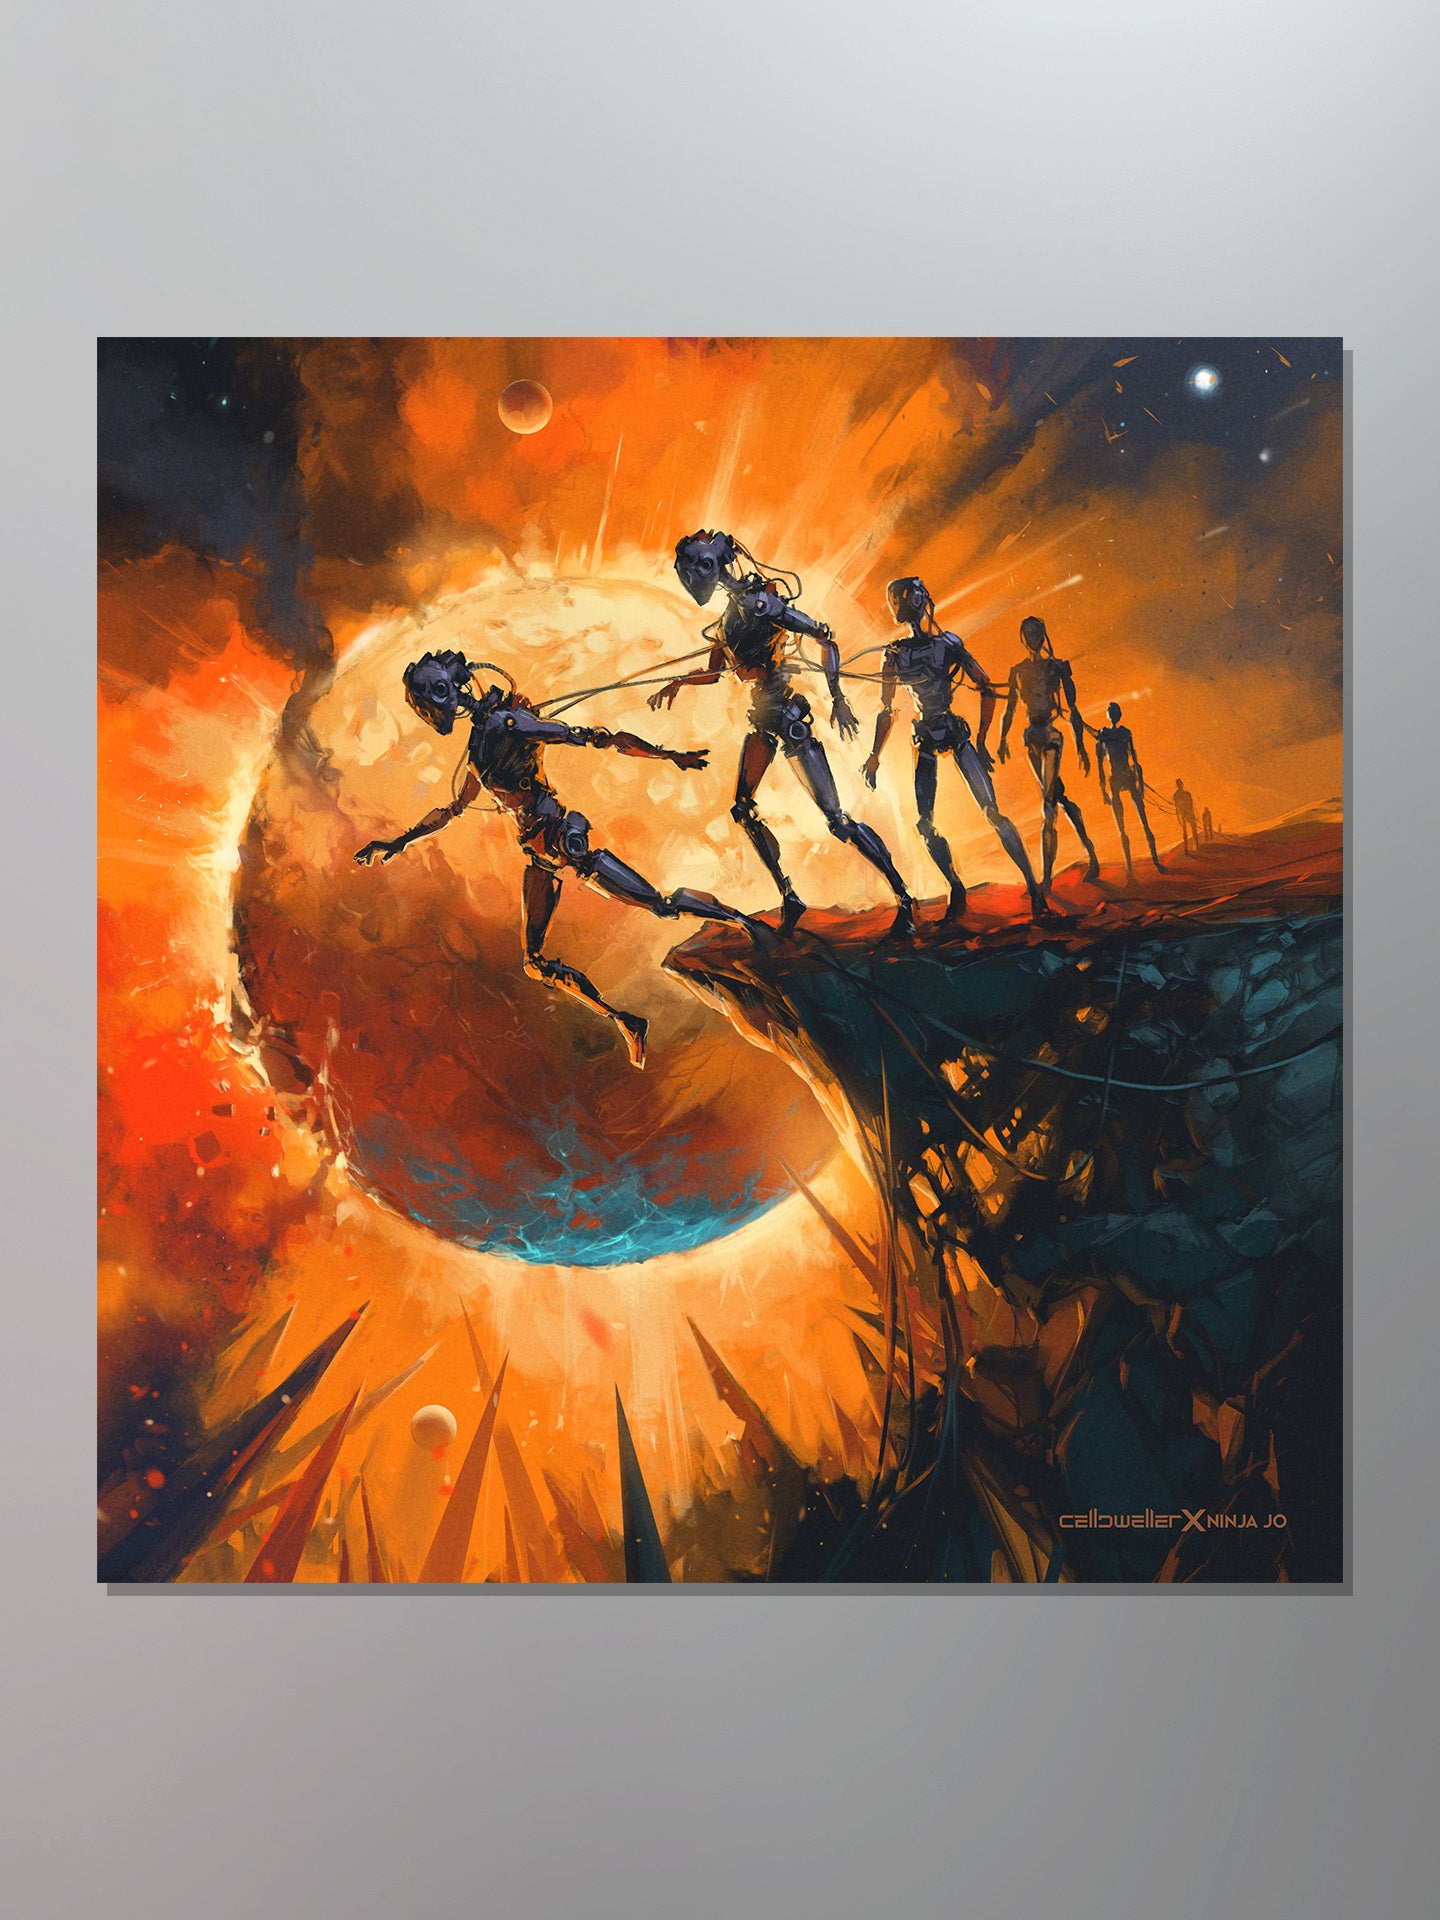 Celldweller - Blind Lead the Blind [Limited Edition Giclee Print]